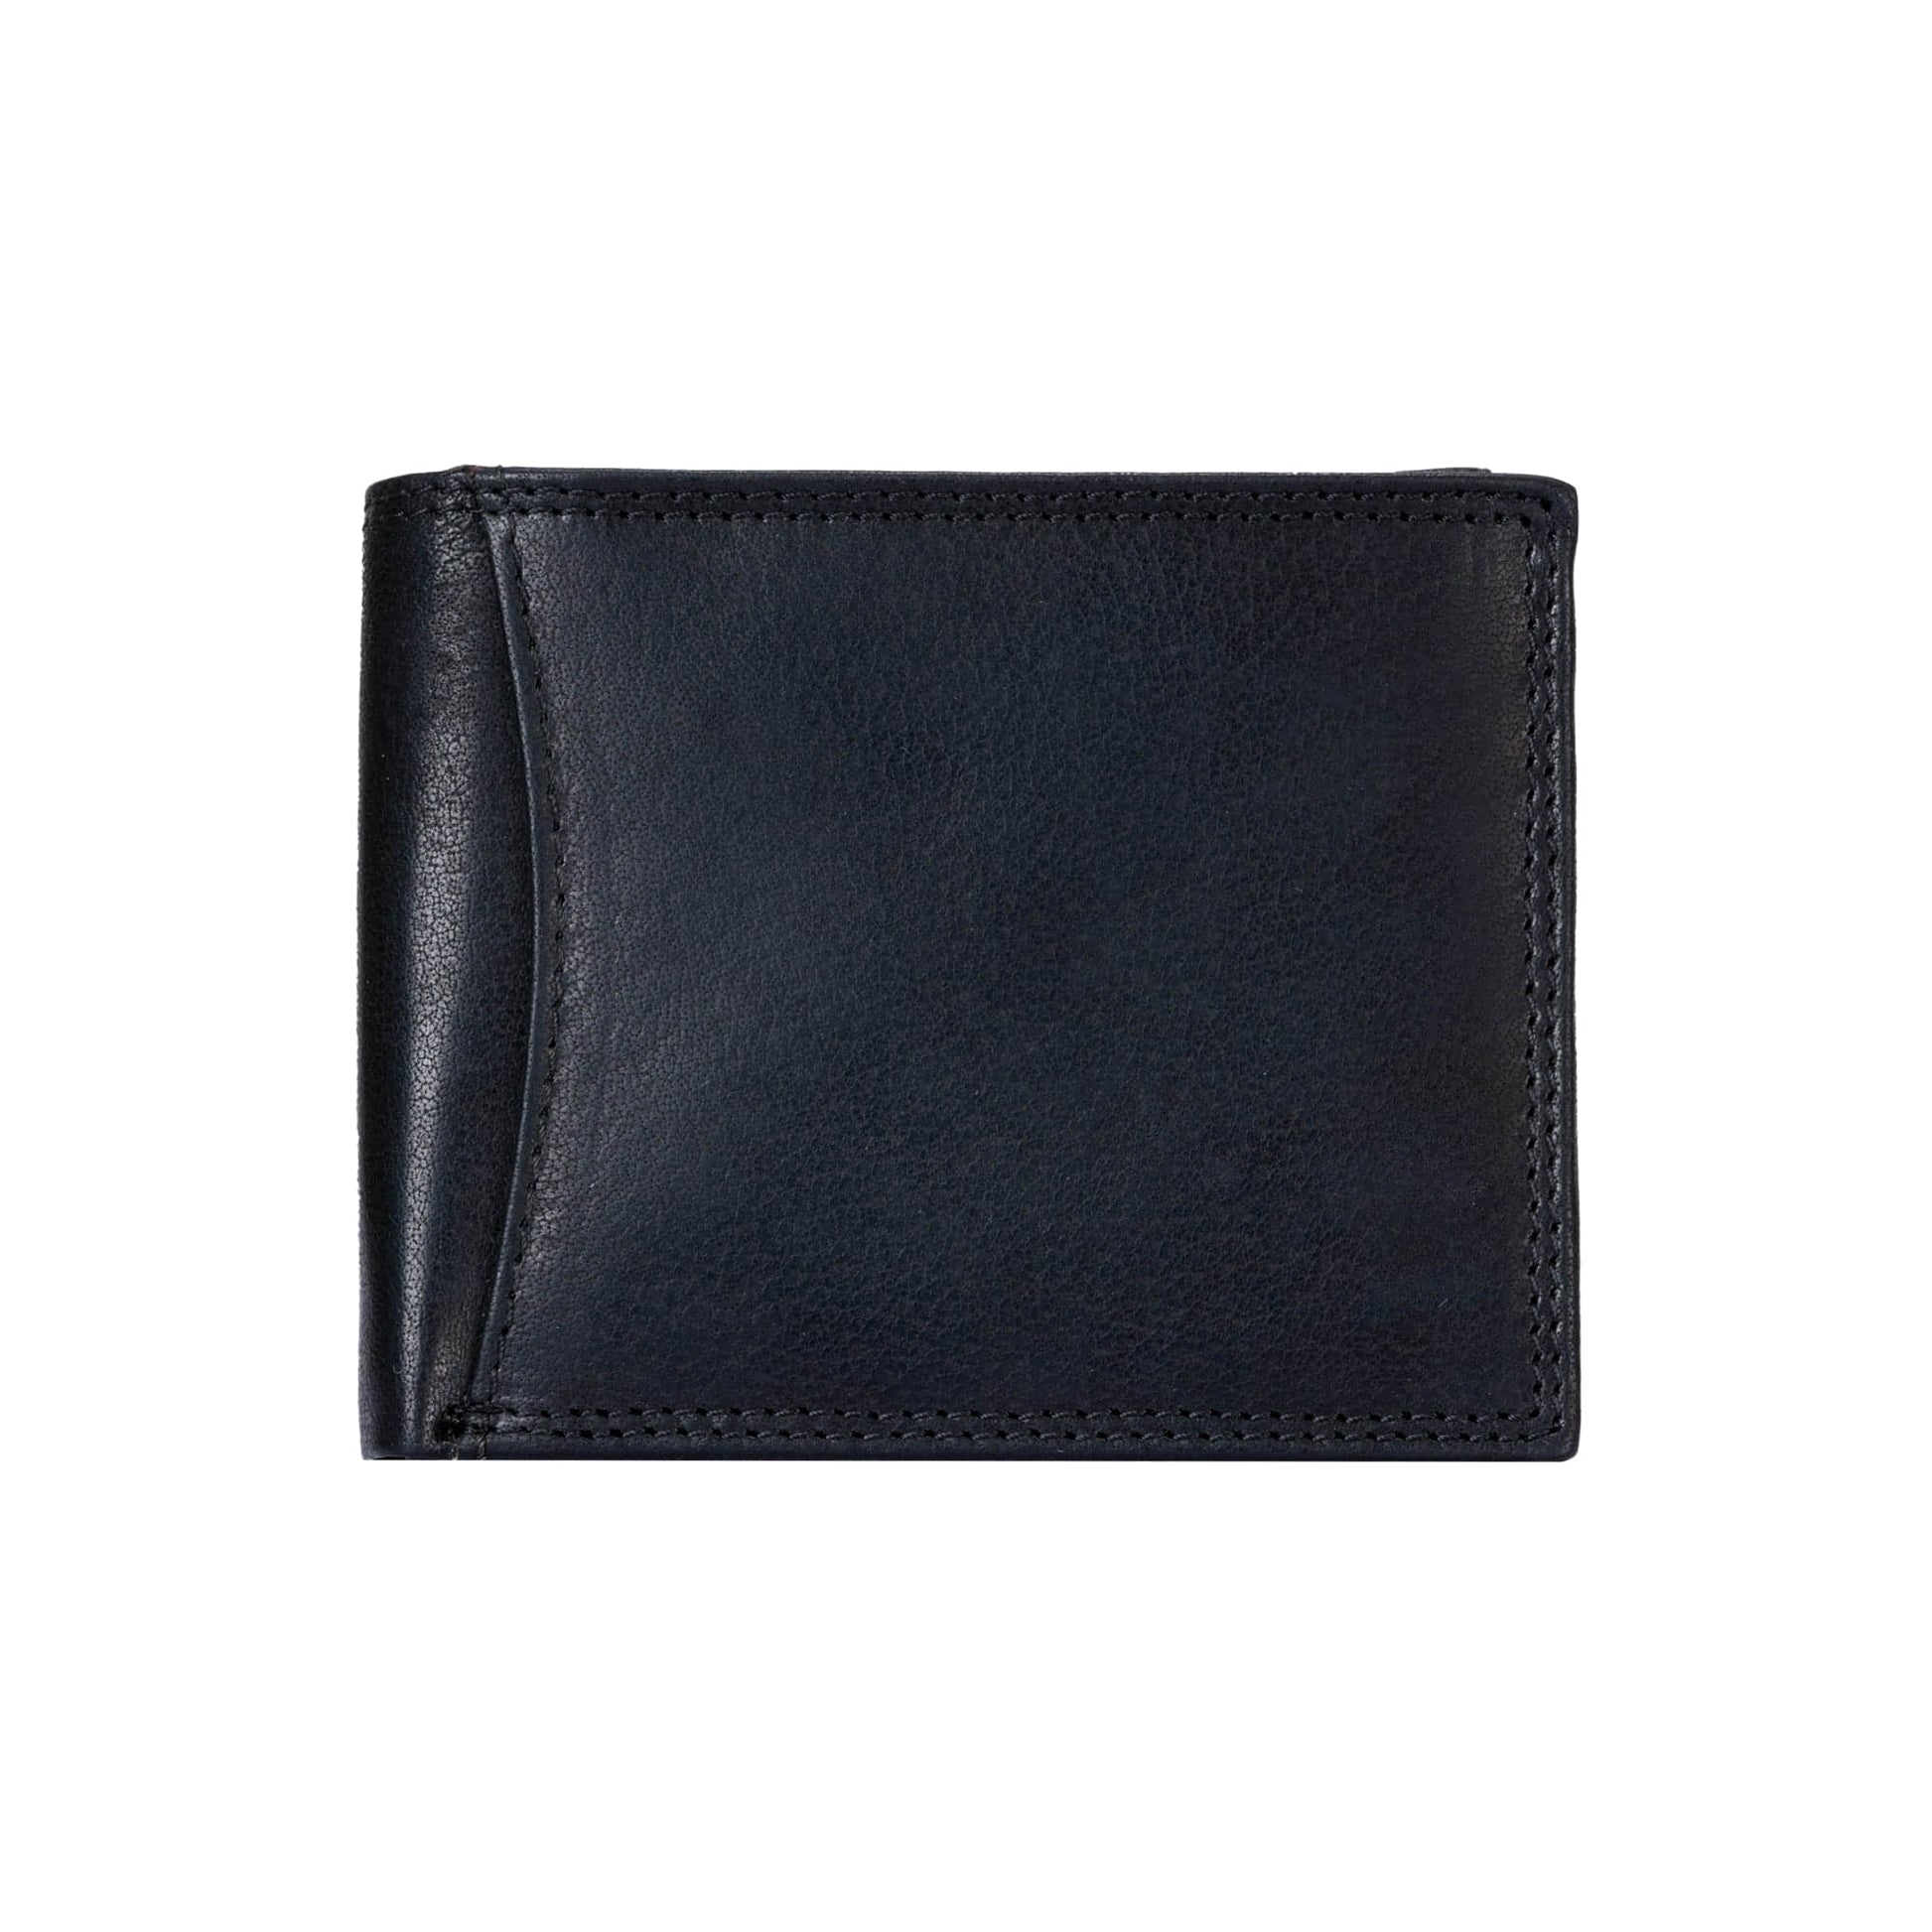 Style n Craft 300796-BL Bi-Fold Pass Case Wallet with Flap in Full Grain Leather - black color - closed front view